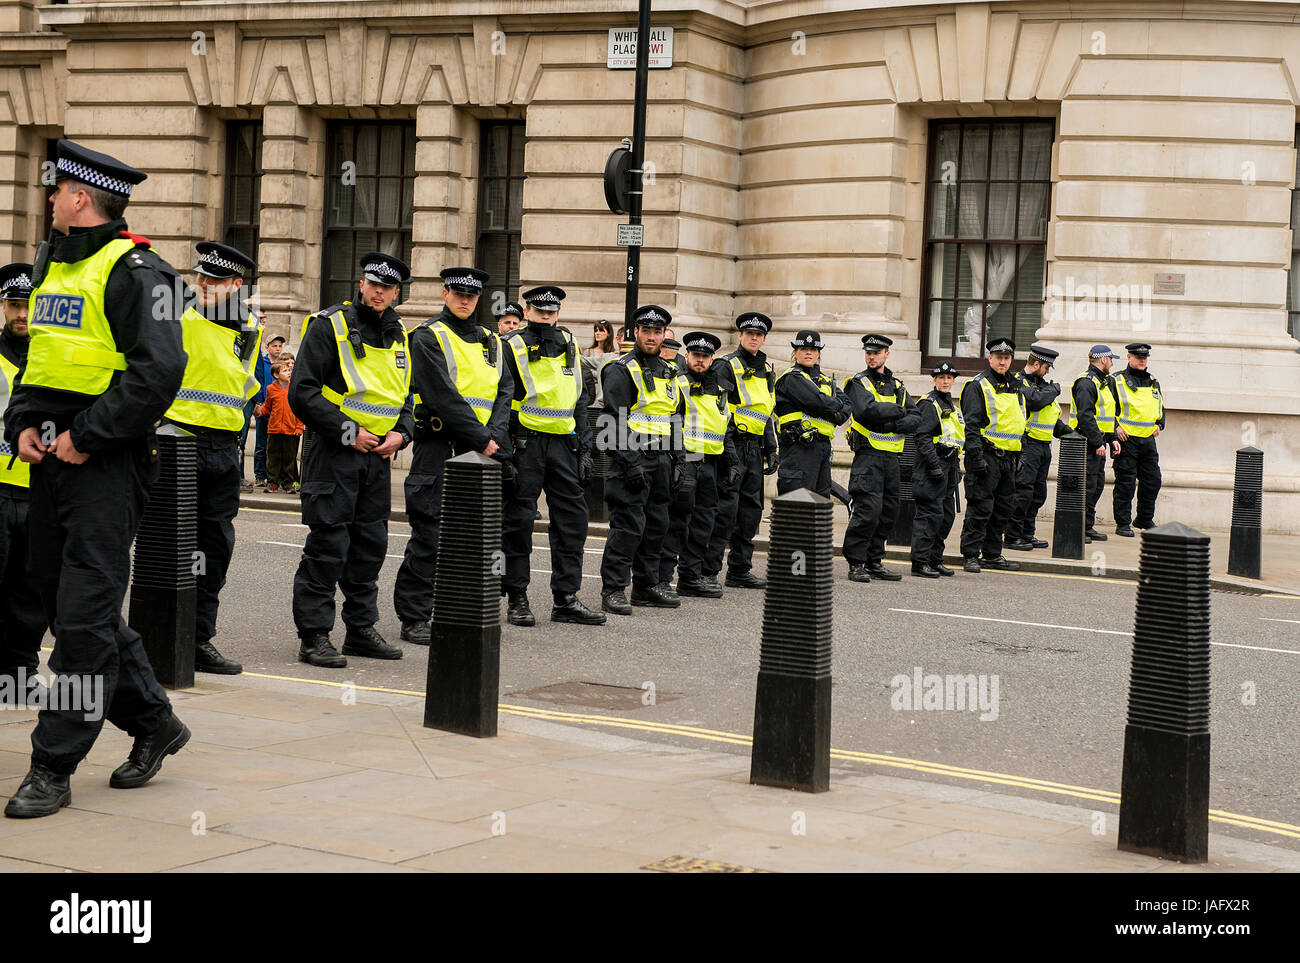 EDL / Britain First rally with counter demo by the Unite Against Fascism movement in central London. Police escorted the demos to keep law and order. Stock Photo